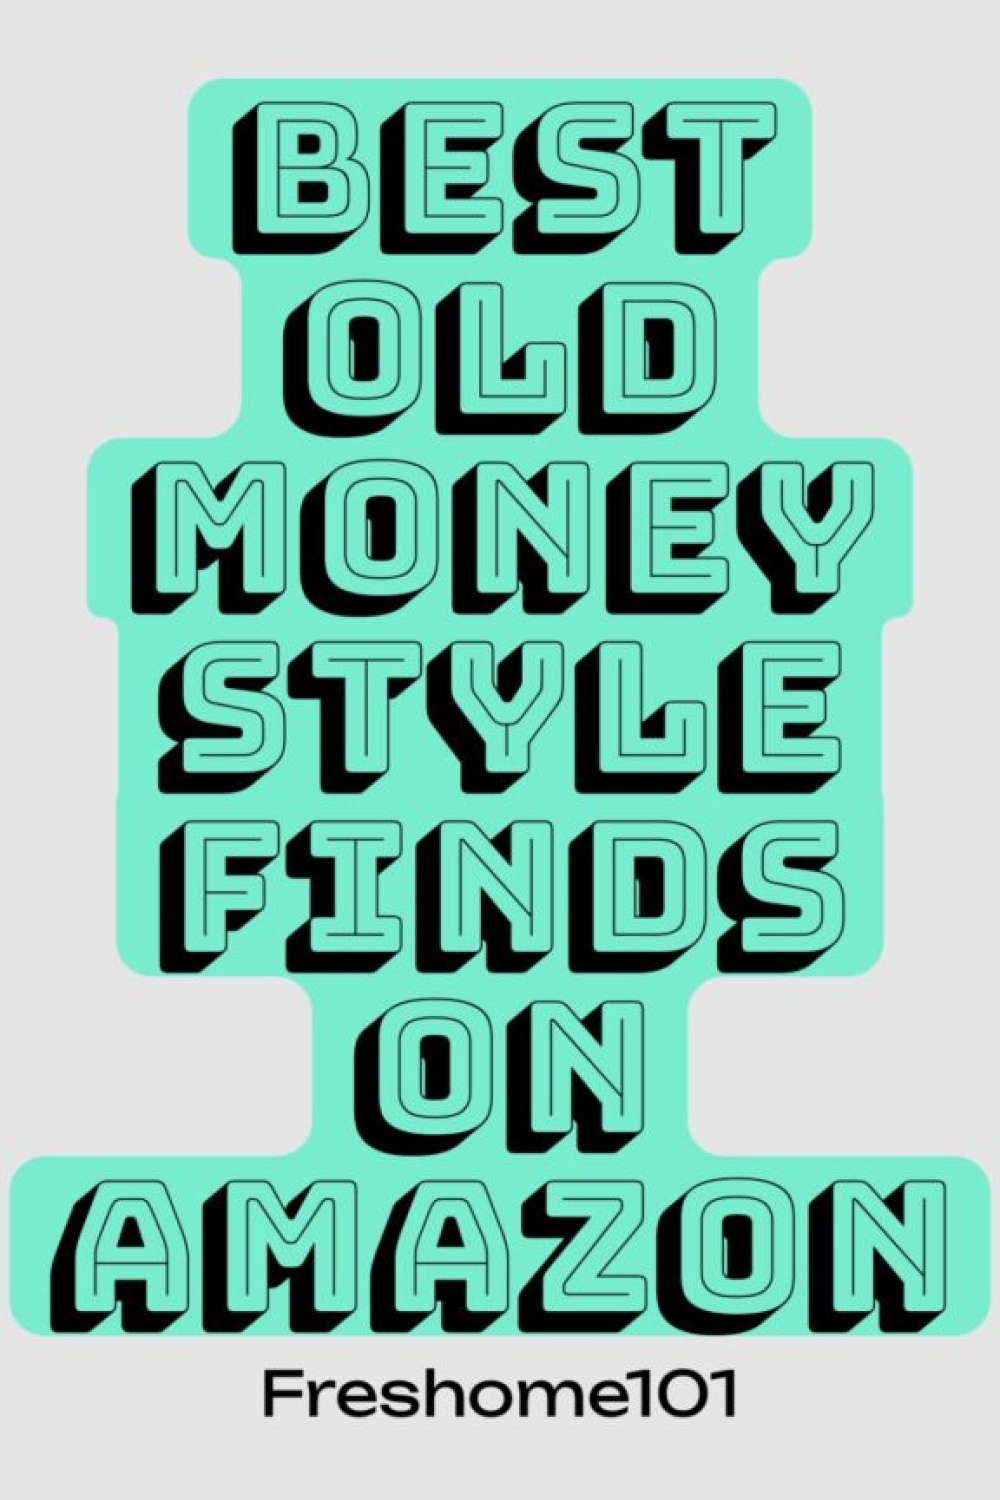 Elevate Your Wardrobe with Timeless Old Money Style: Essential Accessories on Amazon Every Man Needs